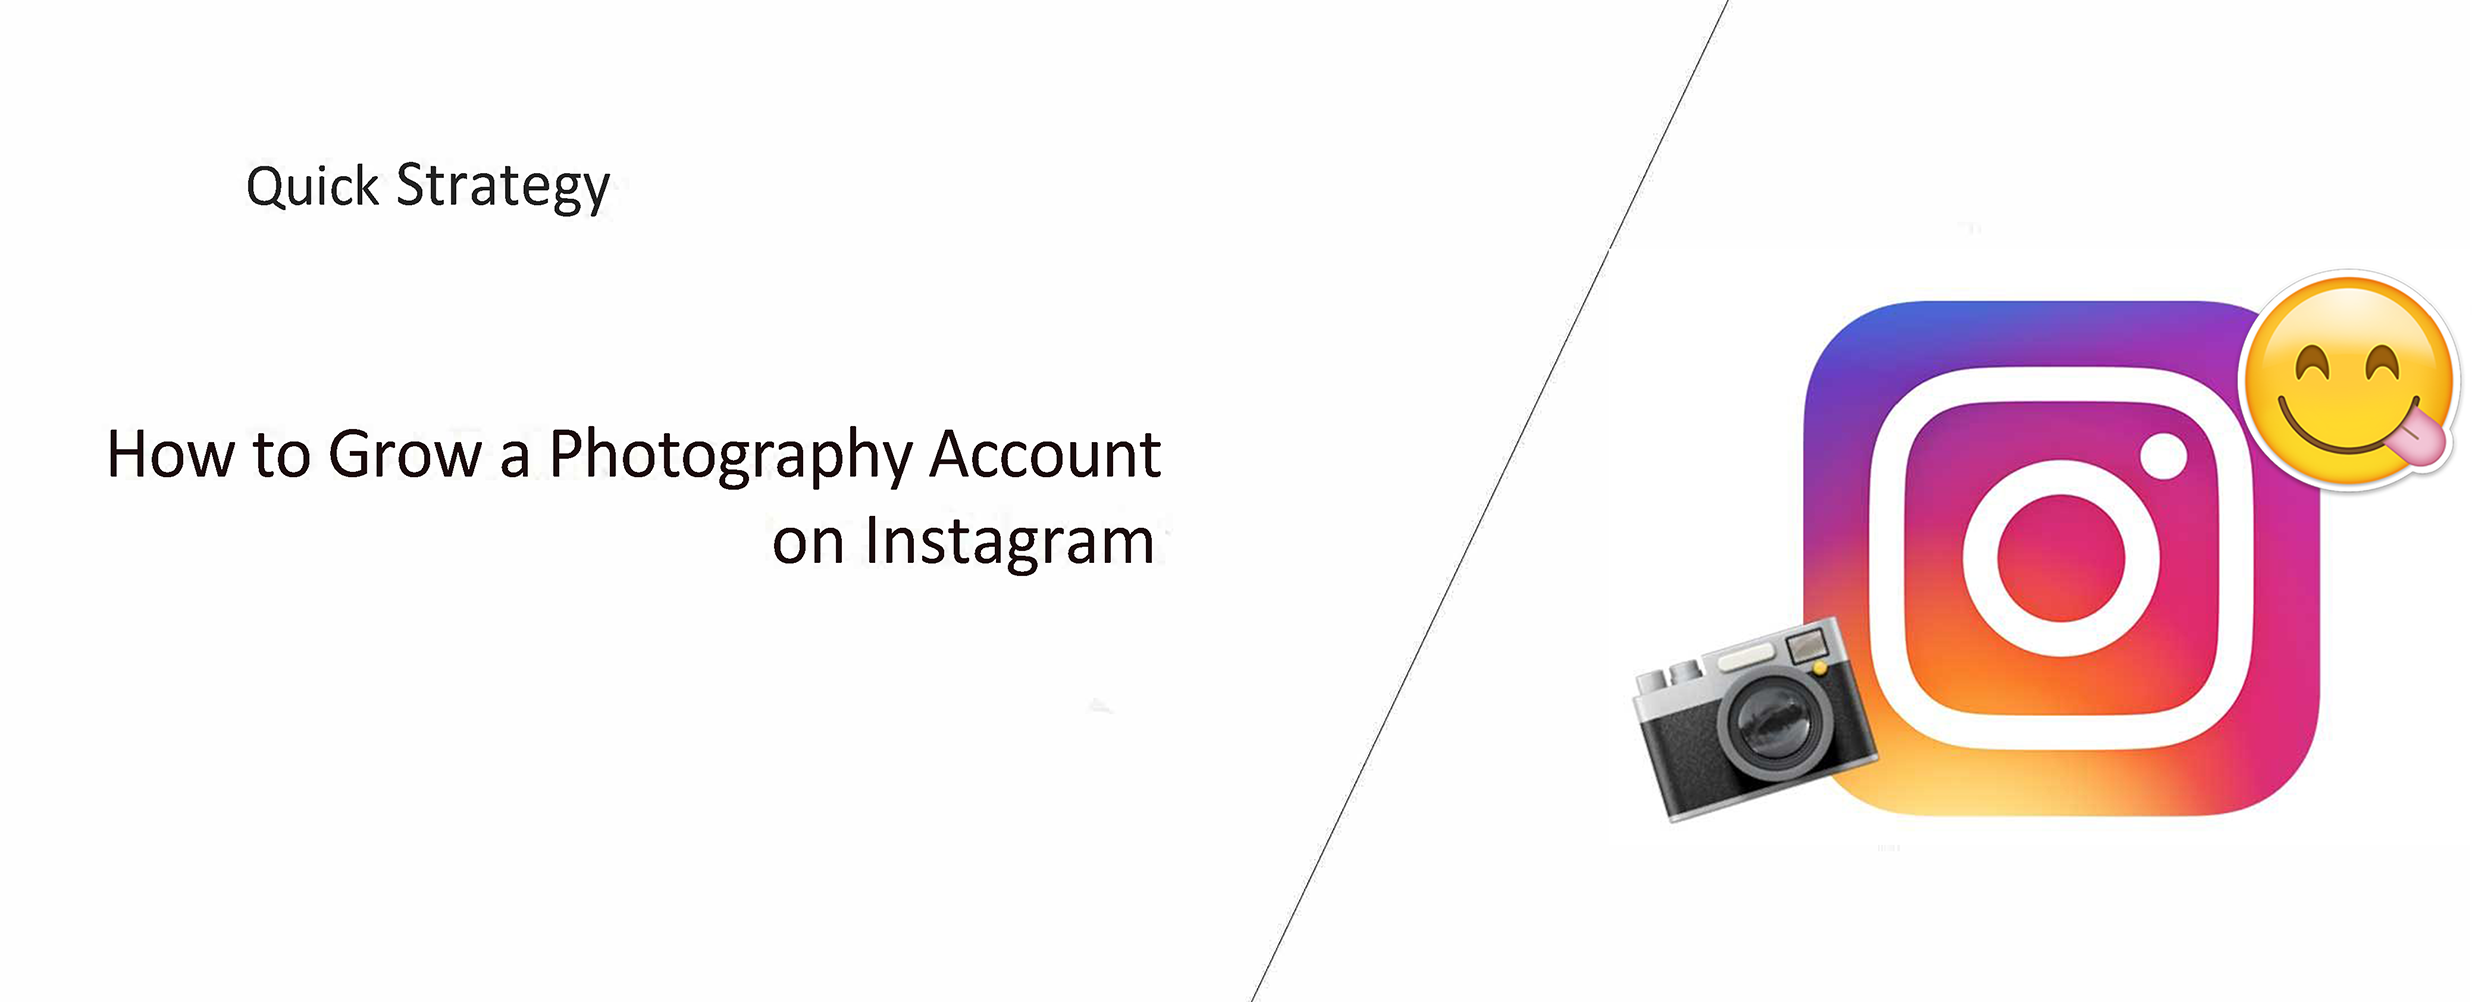 How to Grow a Photography Account on Instagram